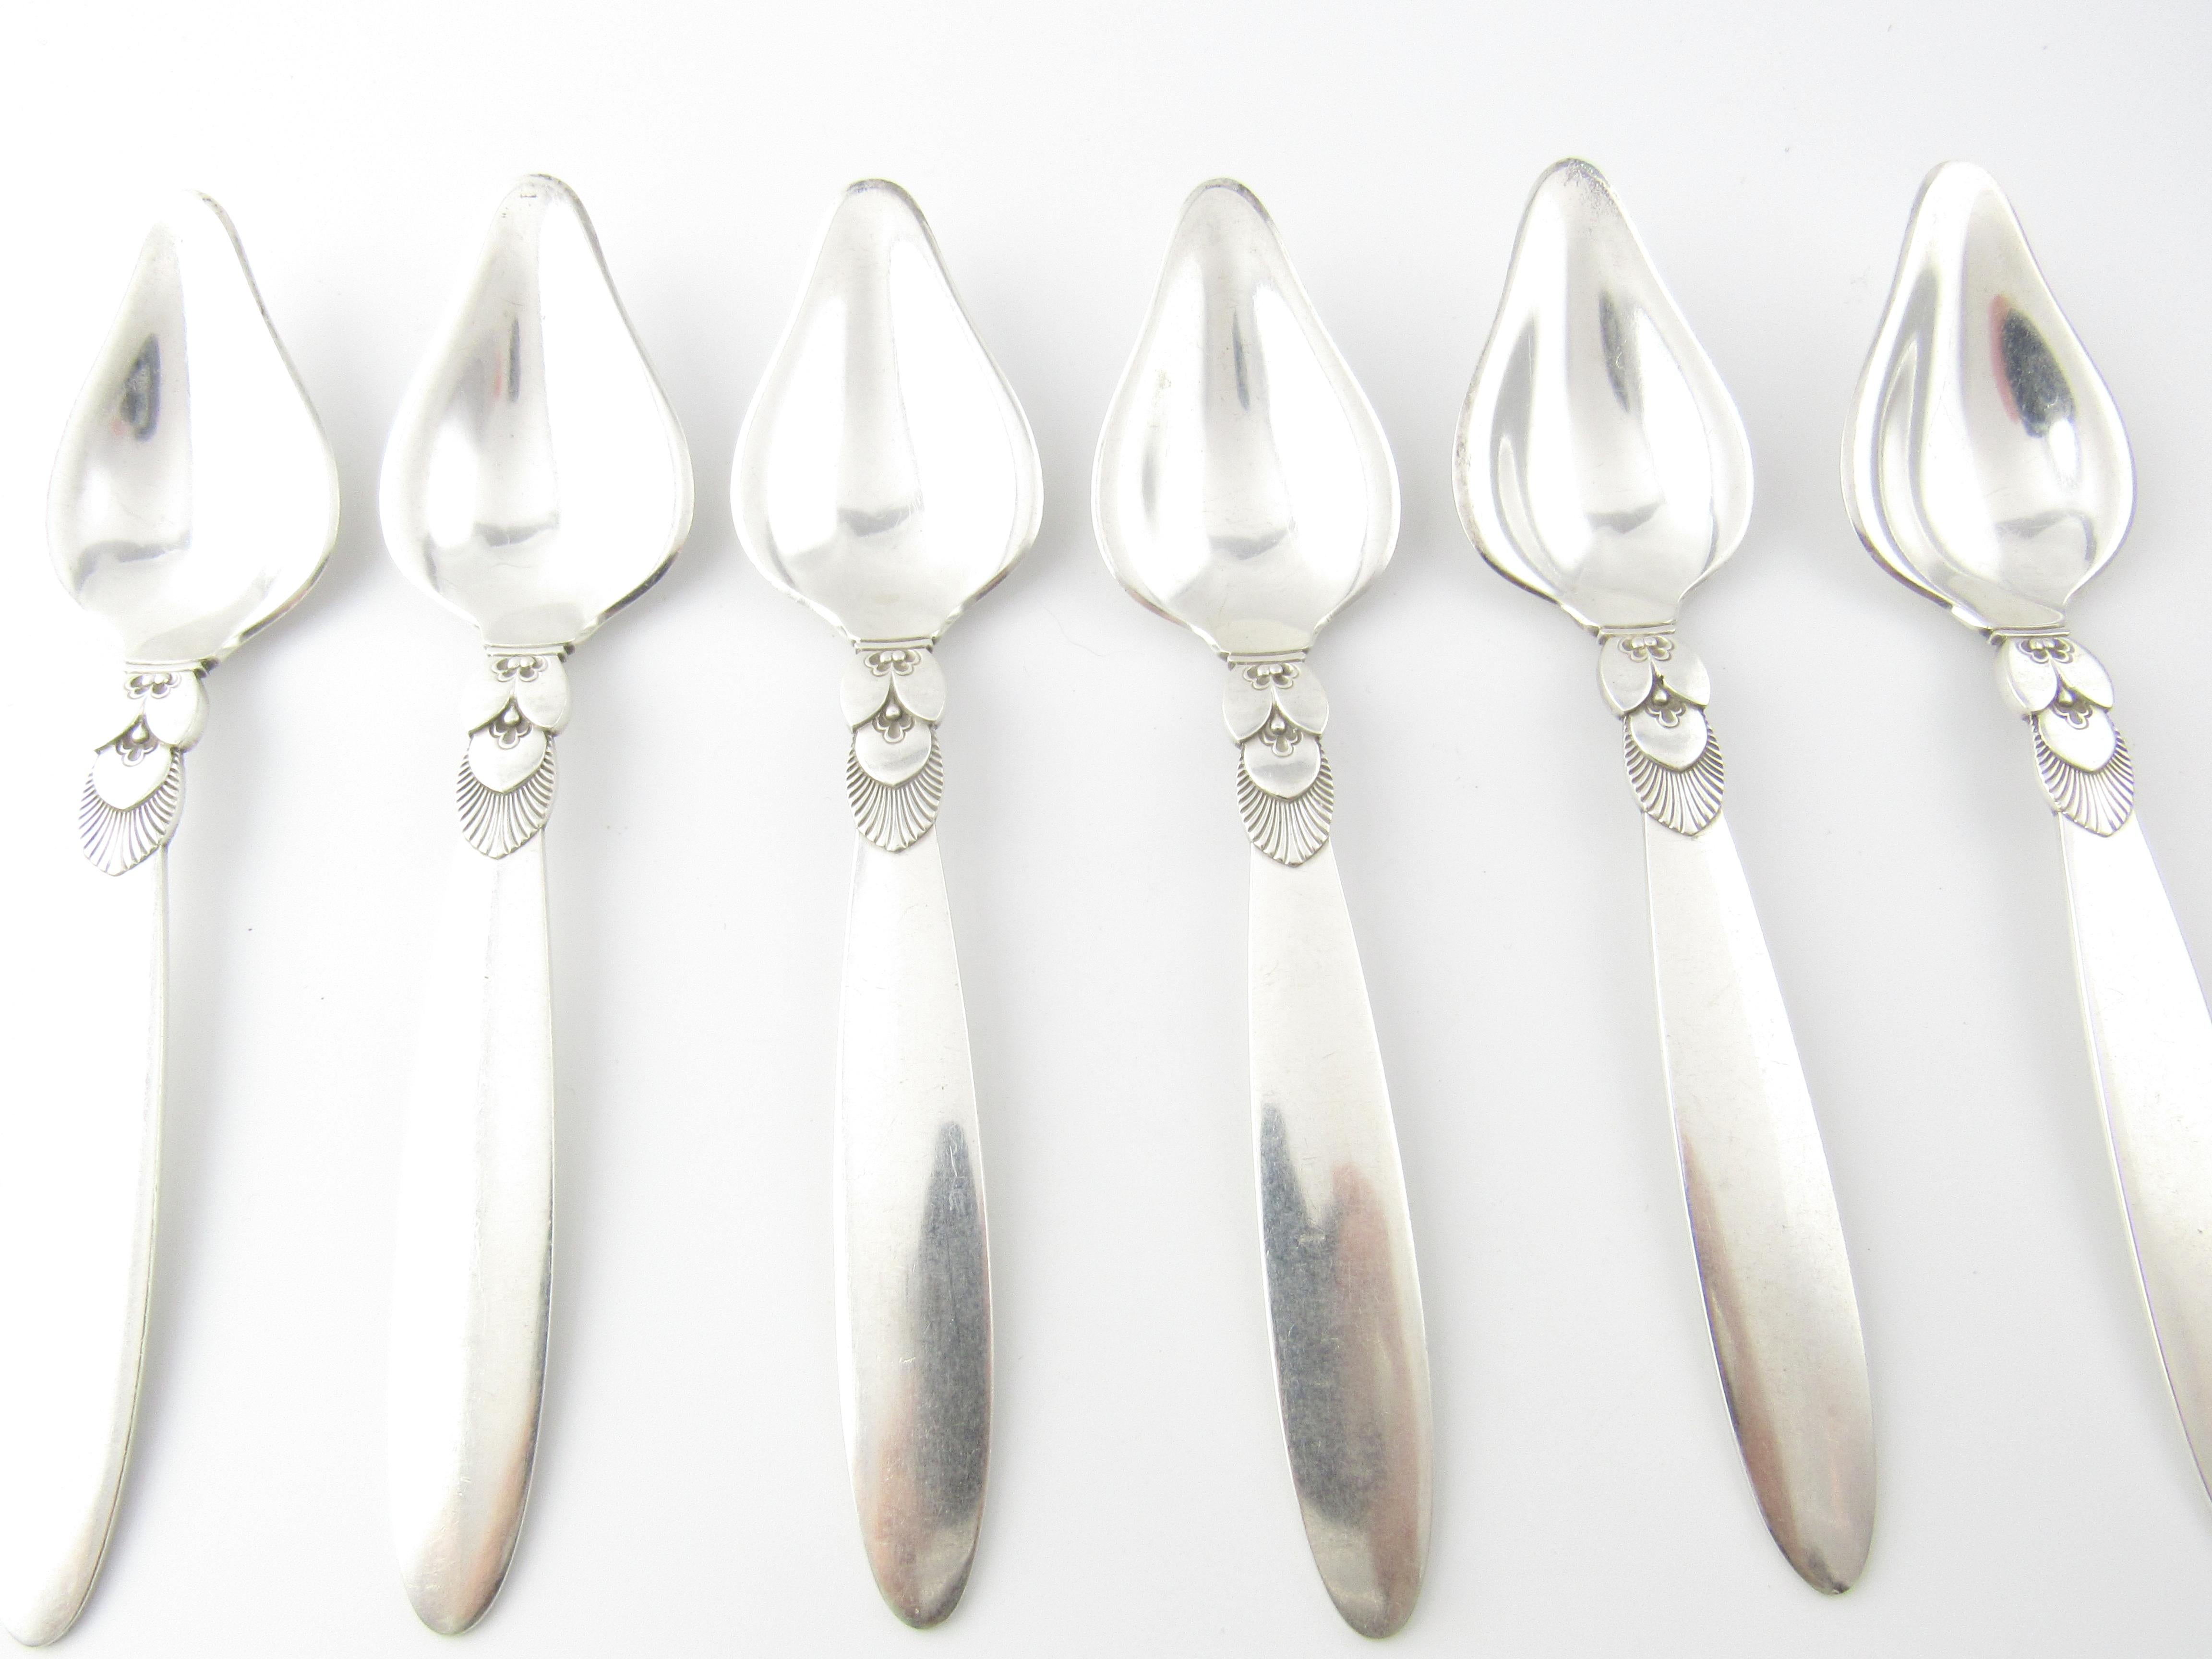 6 Georg Jensen Cactus Sterling Silver Triangular Fruit Spoons #075

This is a very lovely and detailed set of 6 Cactus sterling silver triangular fruit spoons designed by Georg Jensen.

Measurement: Measure 6 inches in length and 1 6/16 inches in